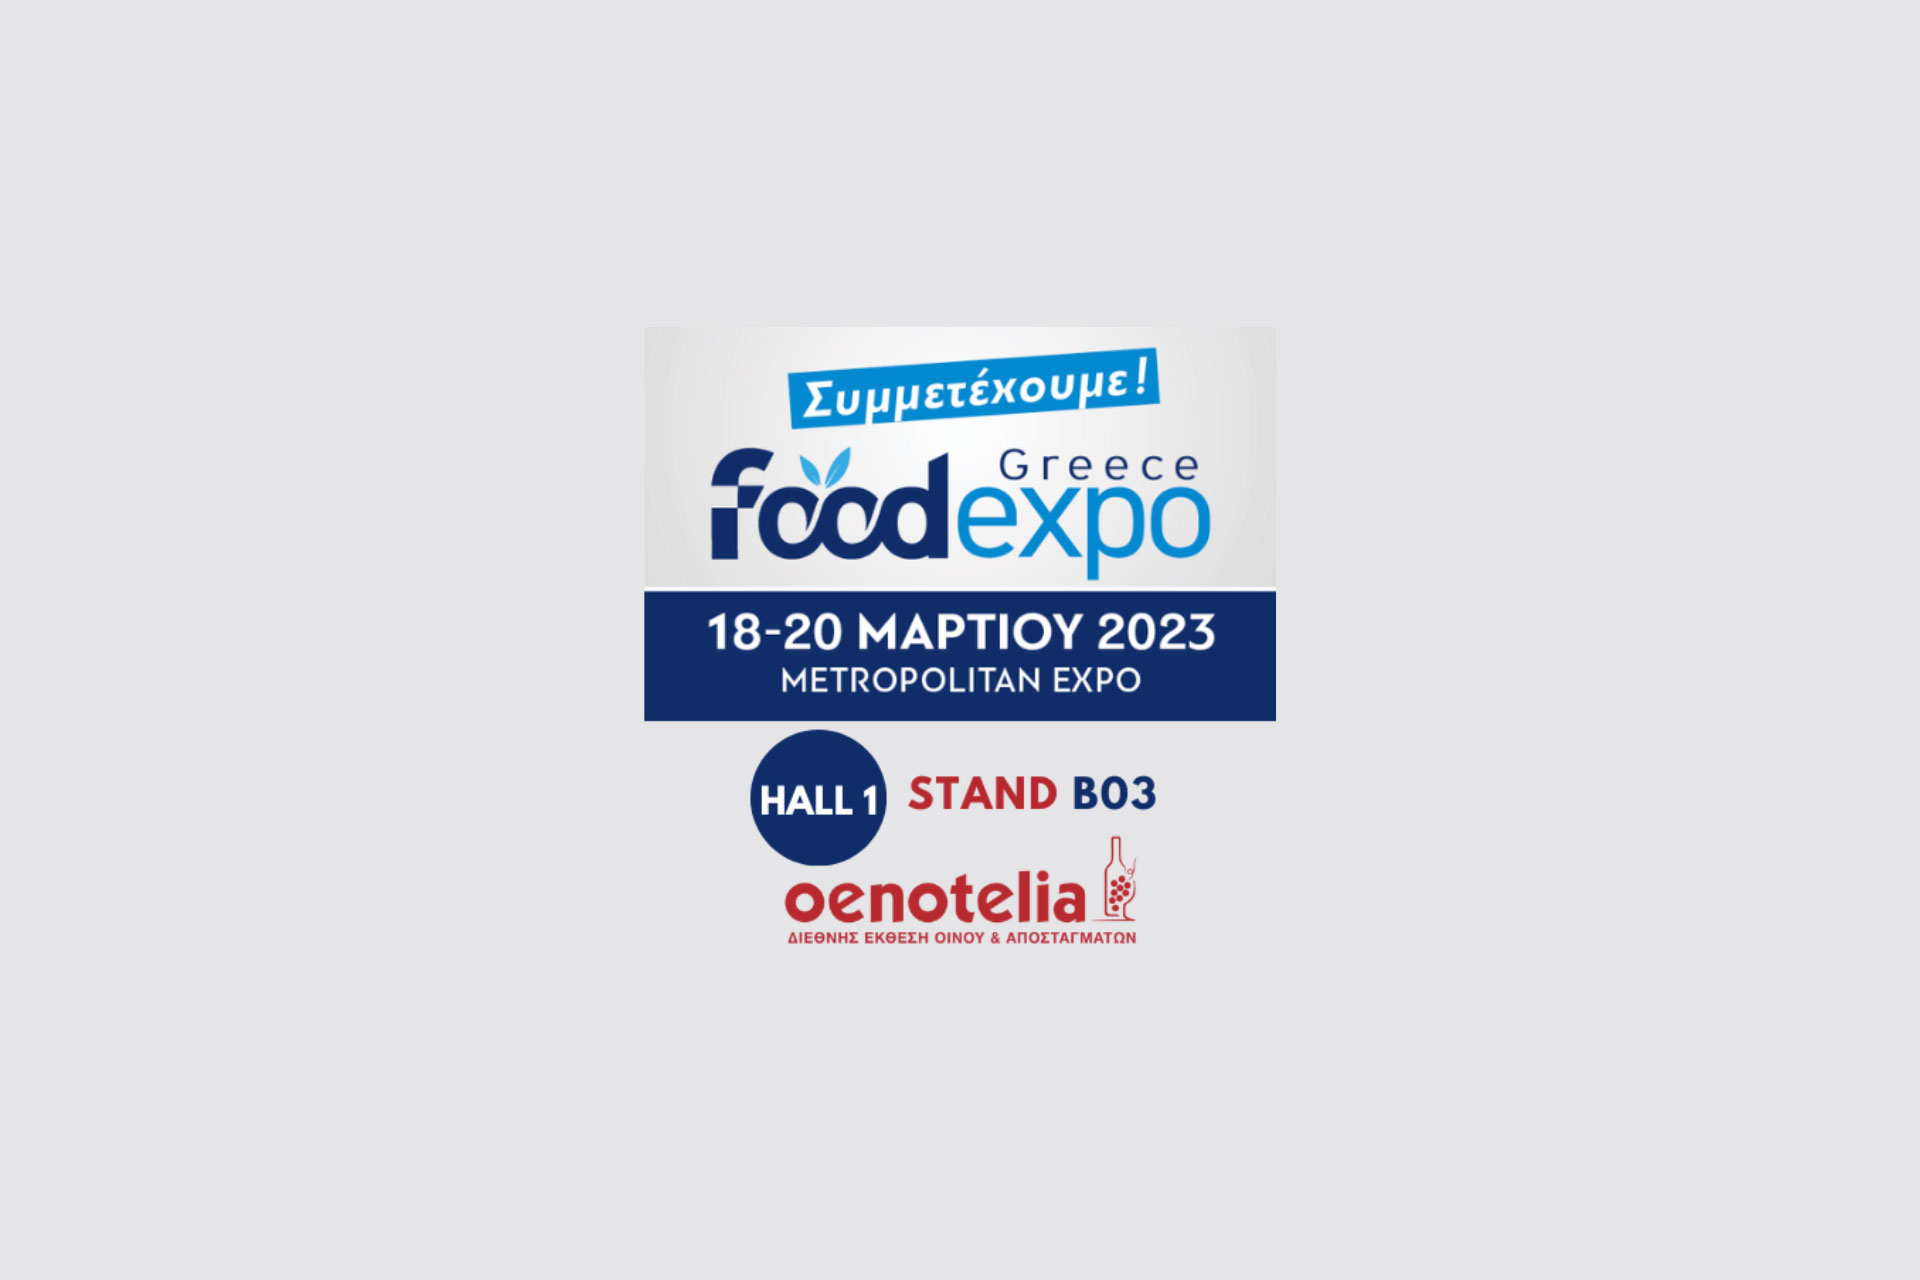 We participate in the Food Expo - Oenotelia on March 18-20 Stand B03